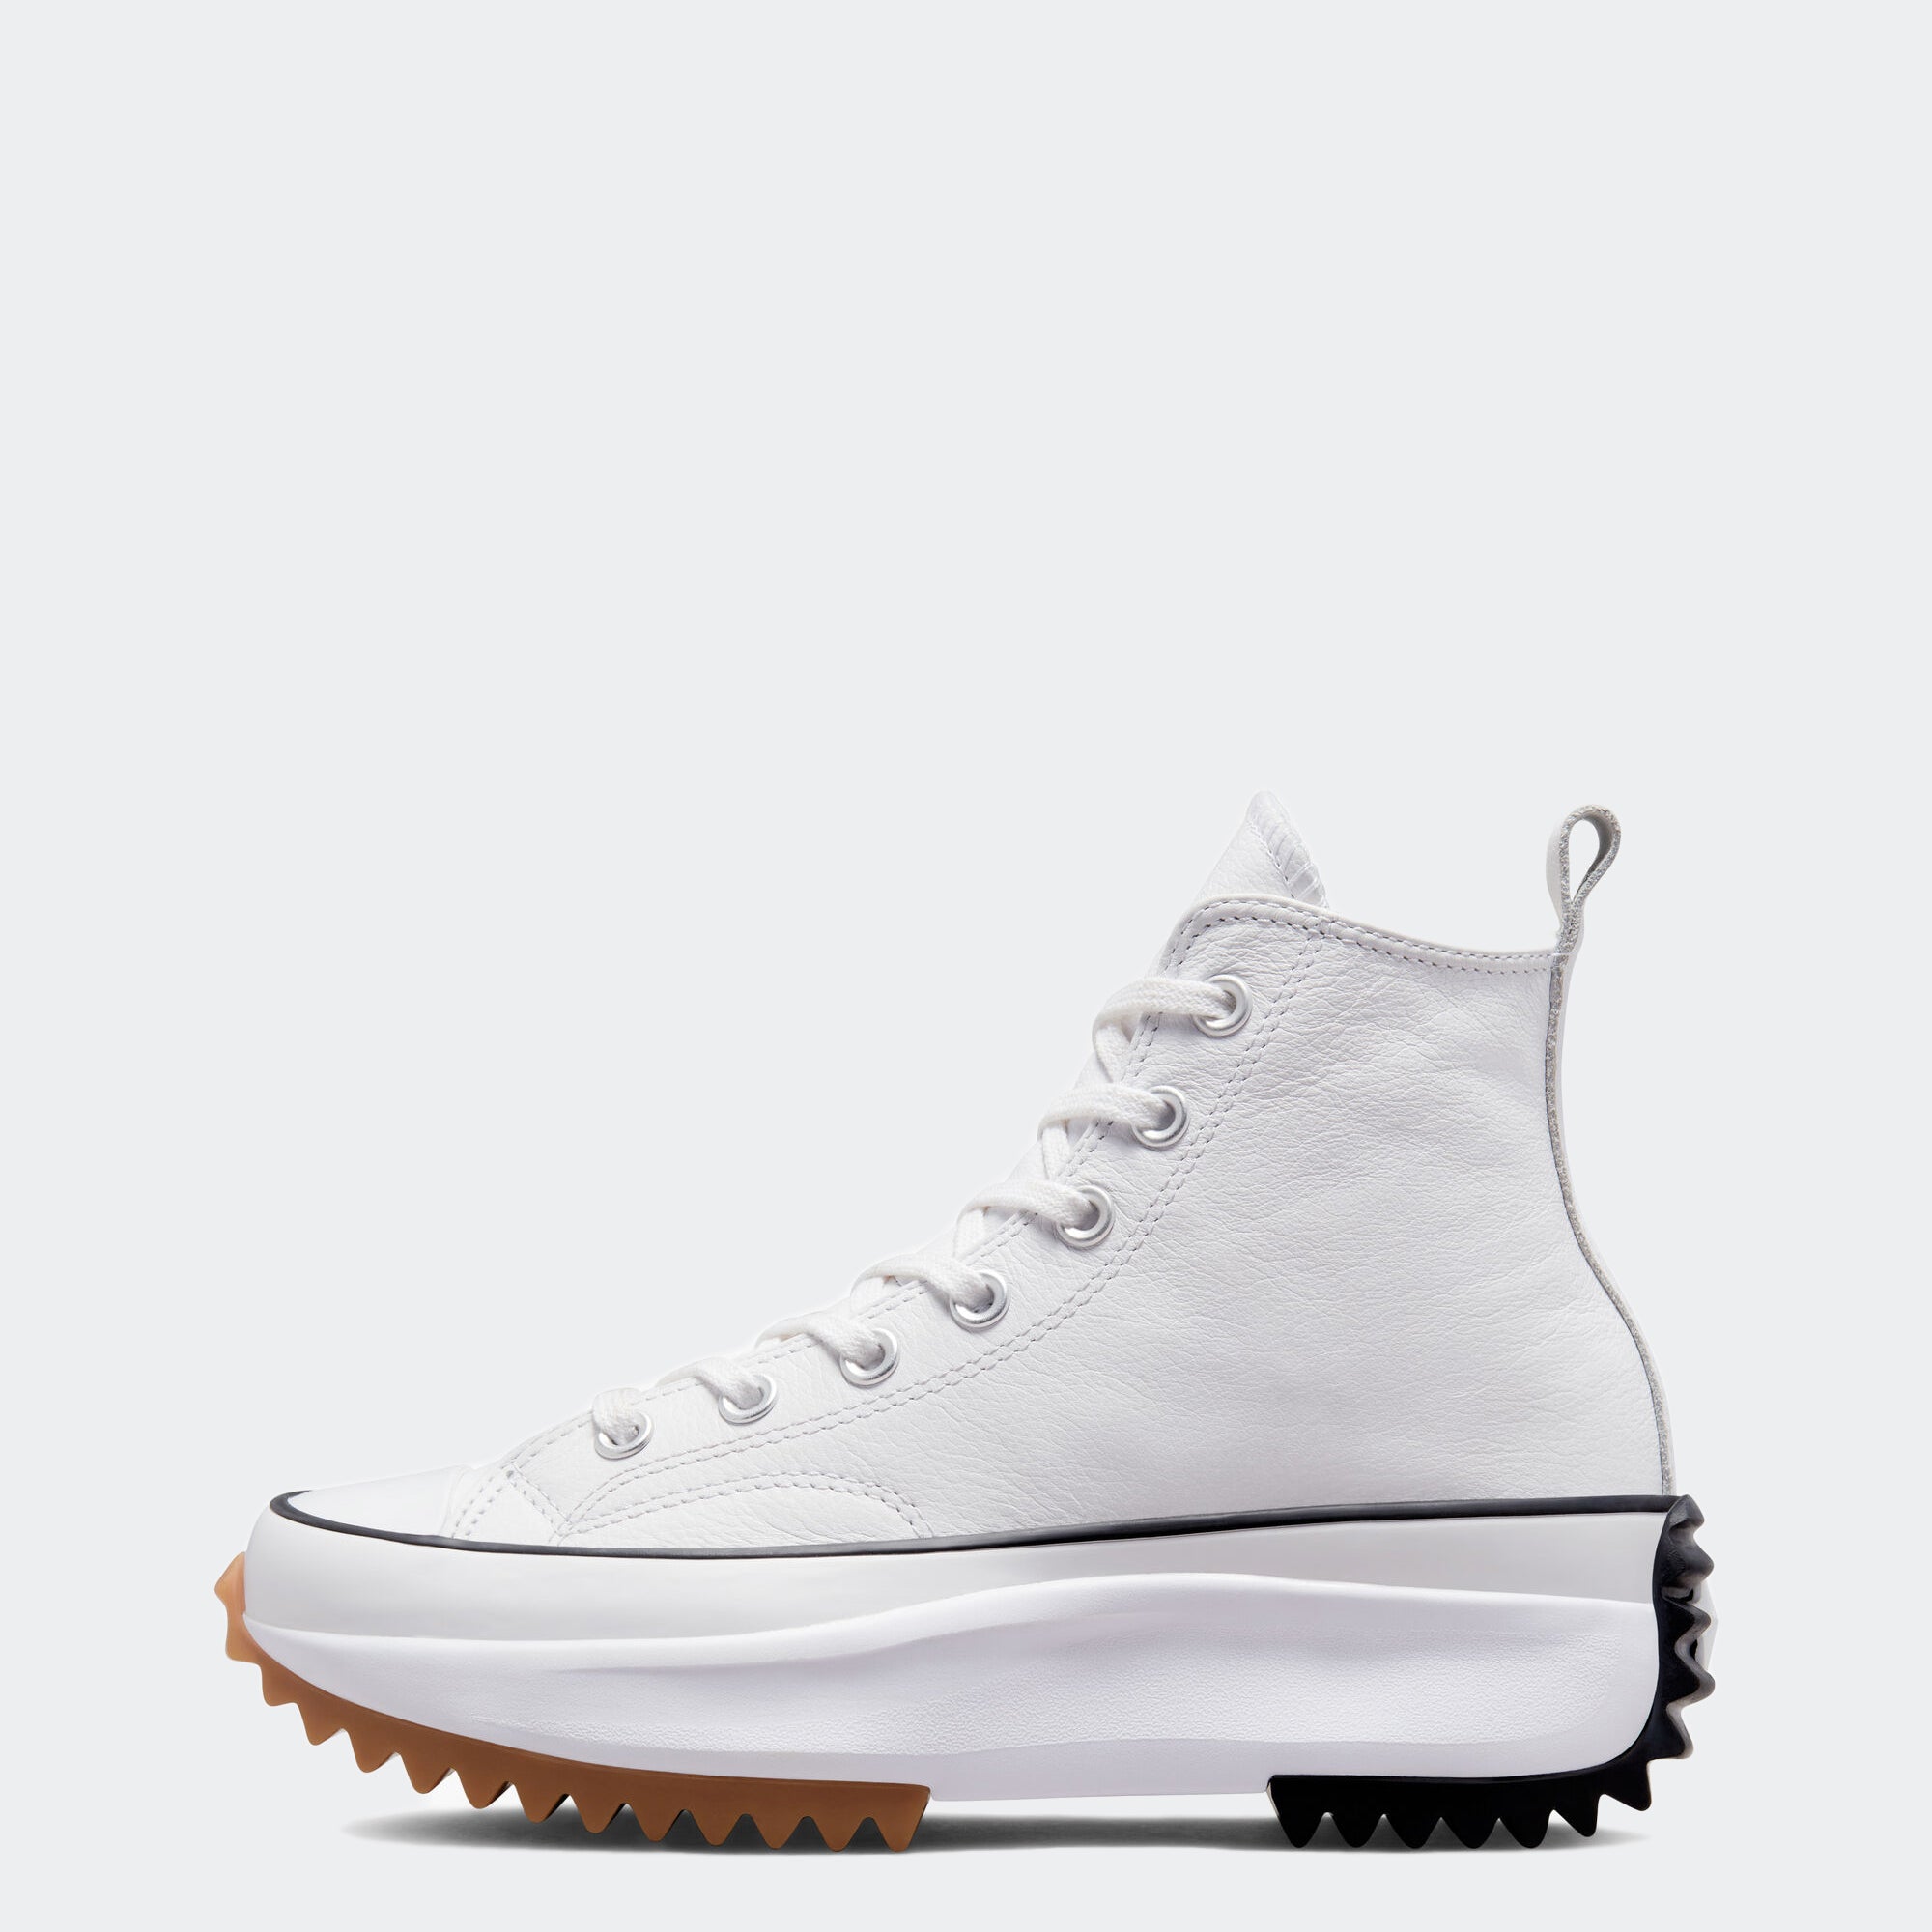 Converse Run Star Hike Shoes White Leather | Chicago City Sports